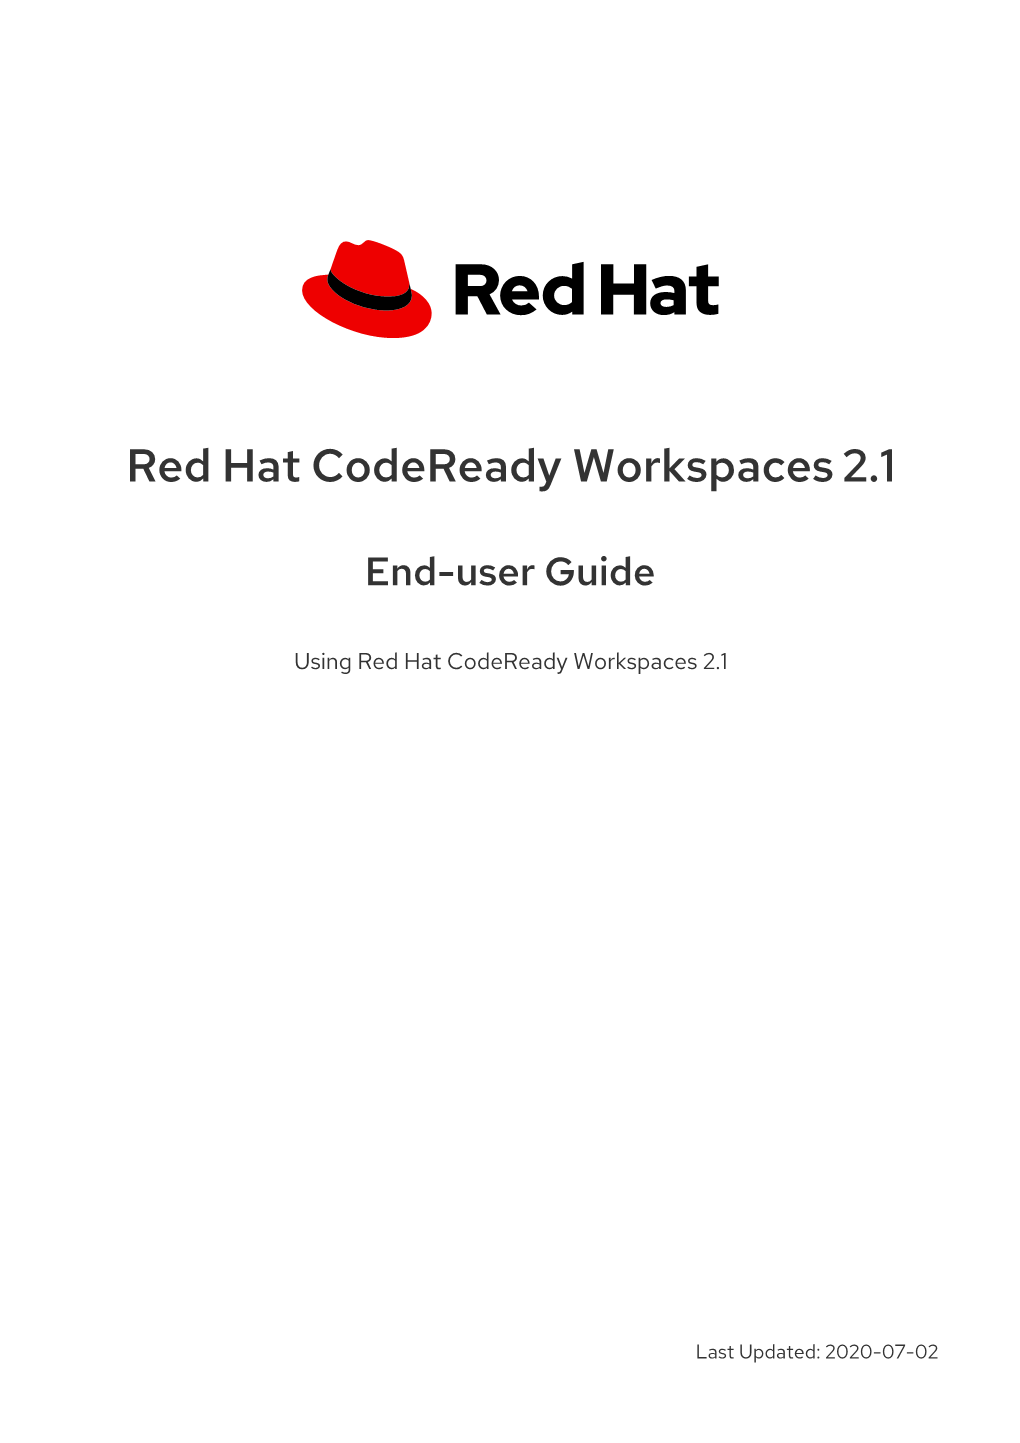 Red Hat Codeready Workspaces 2.1 End-User Guide